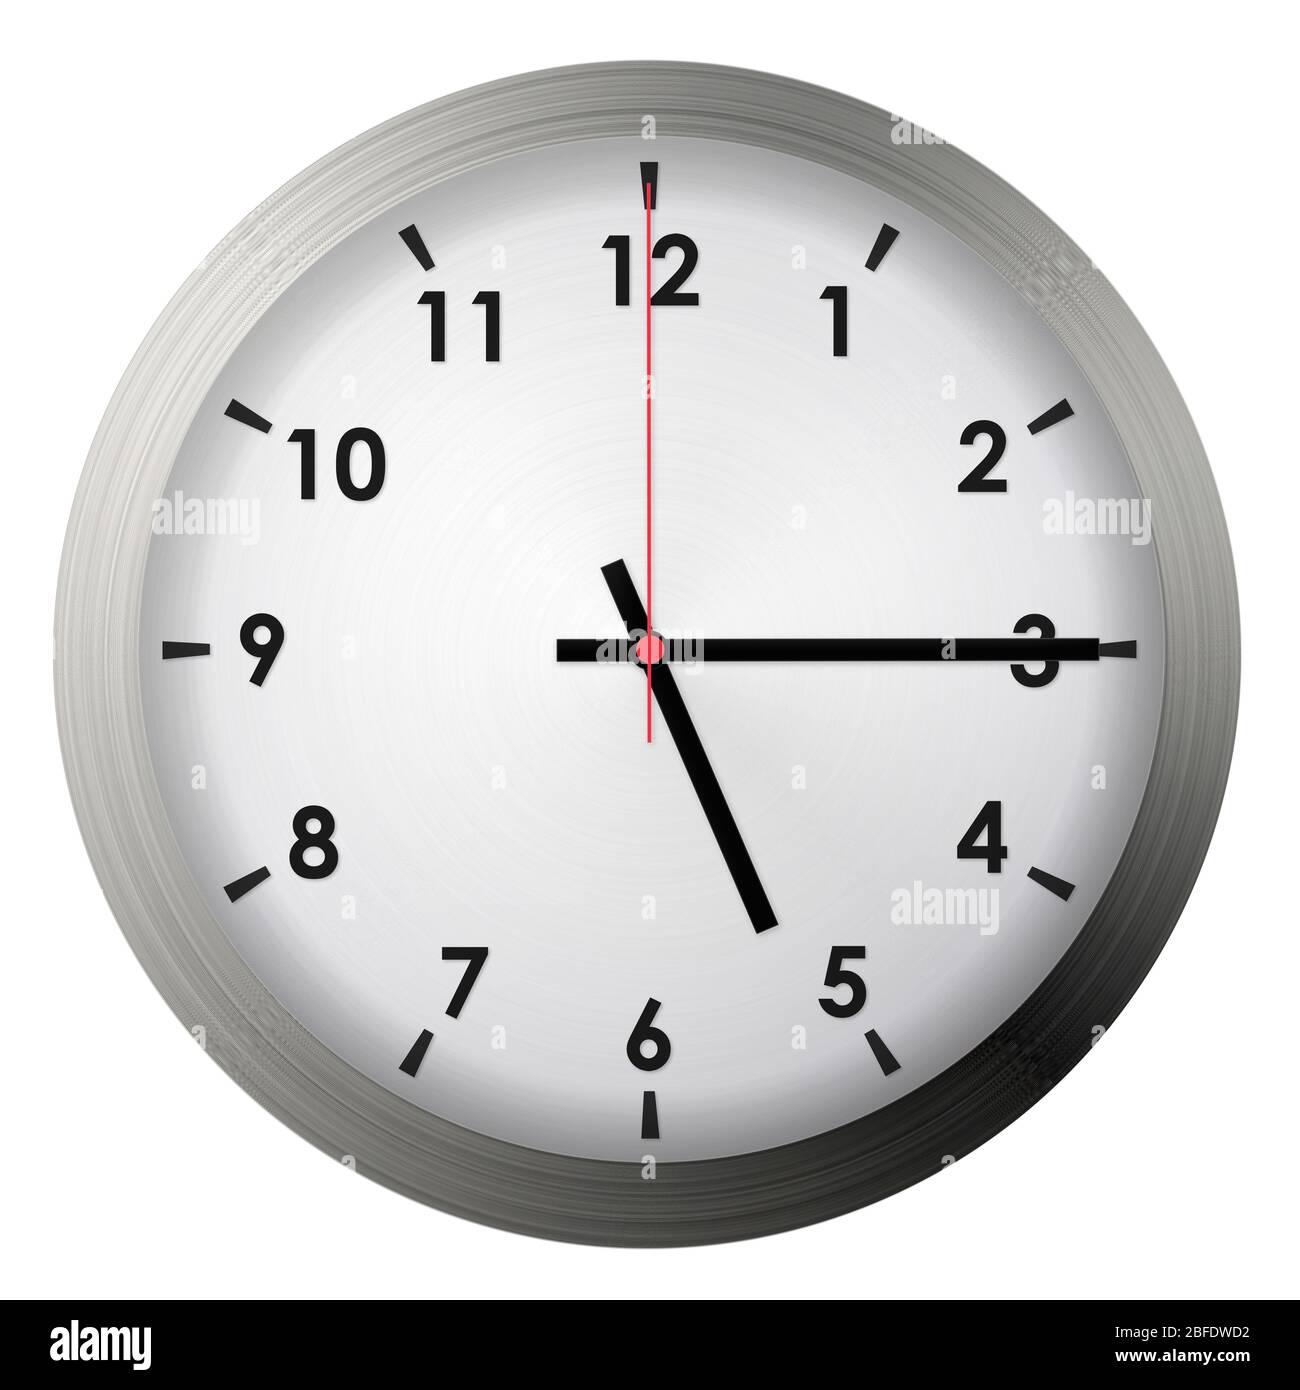 Analog metal wall clock isolated on white background. Stock Photo